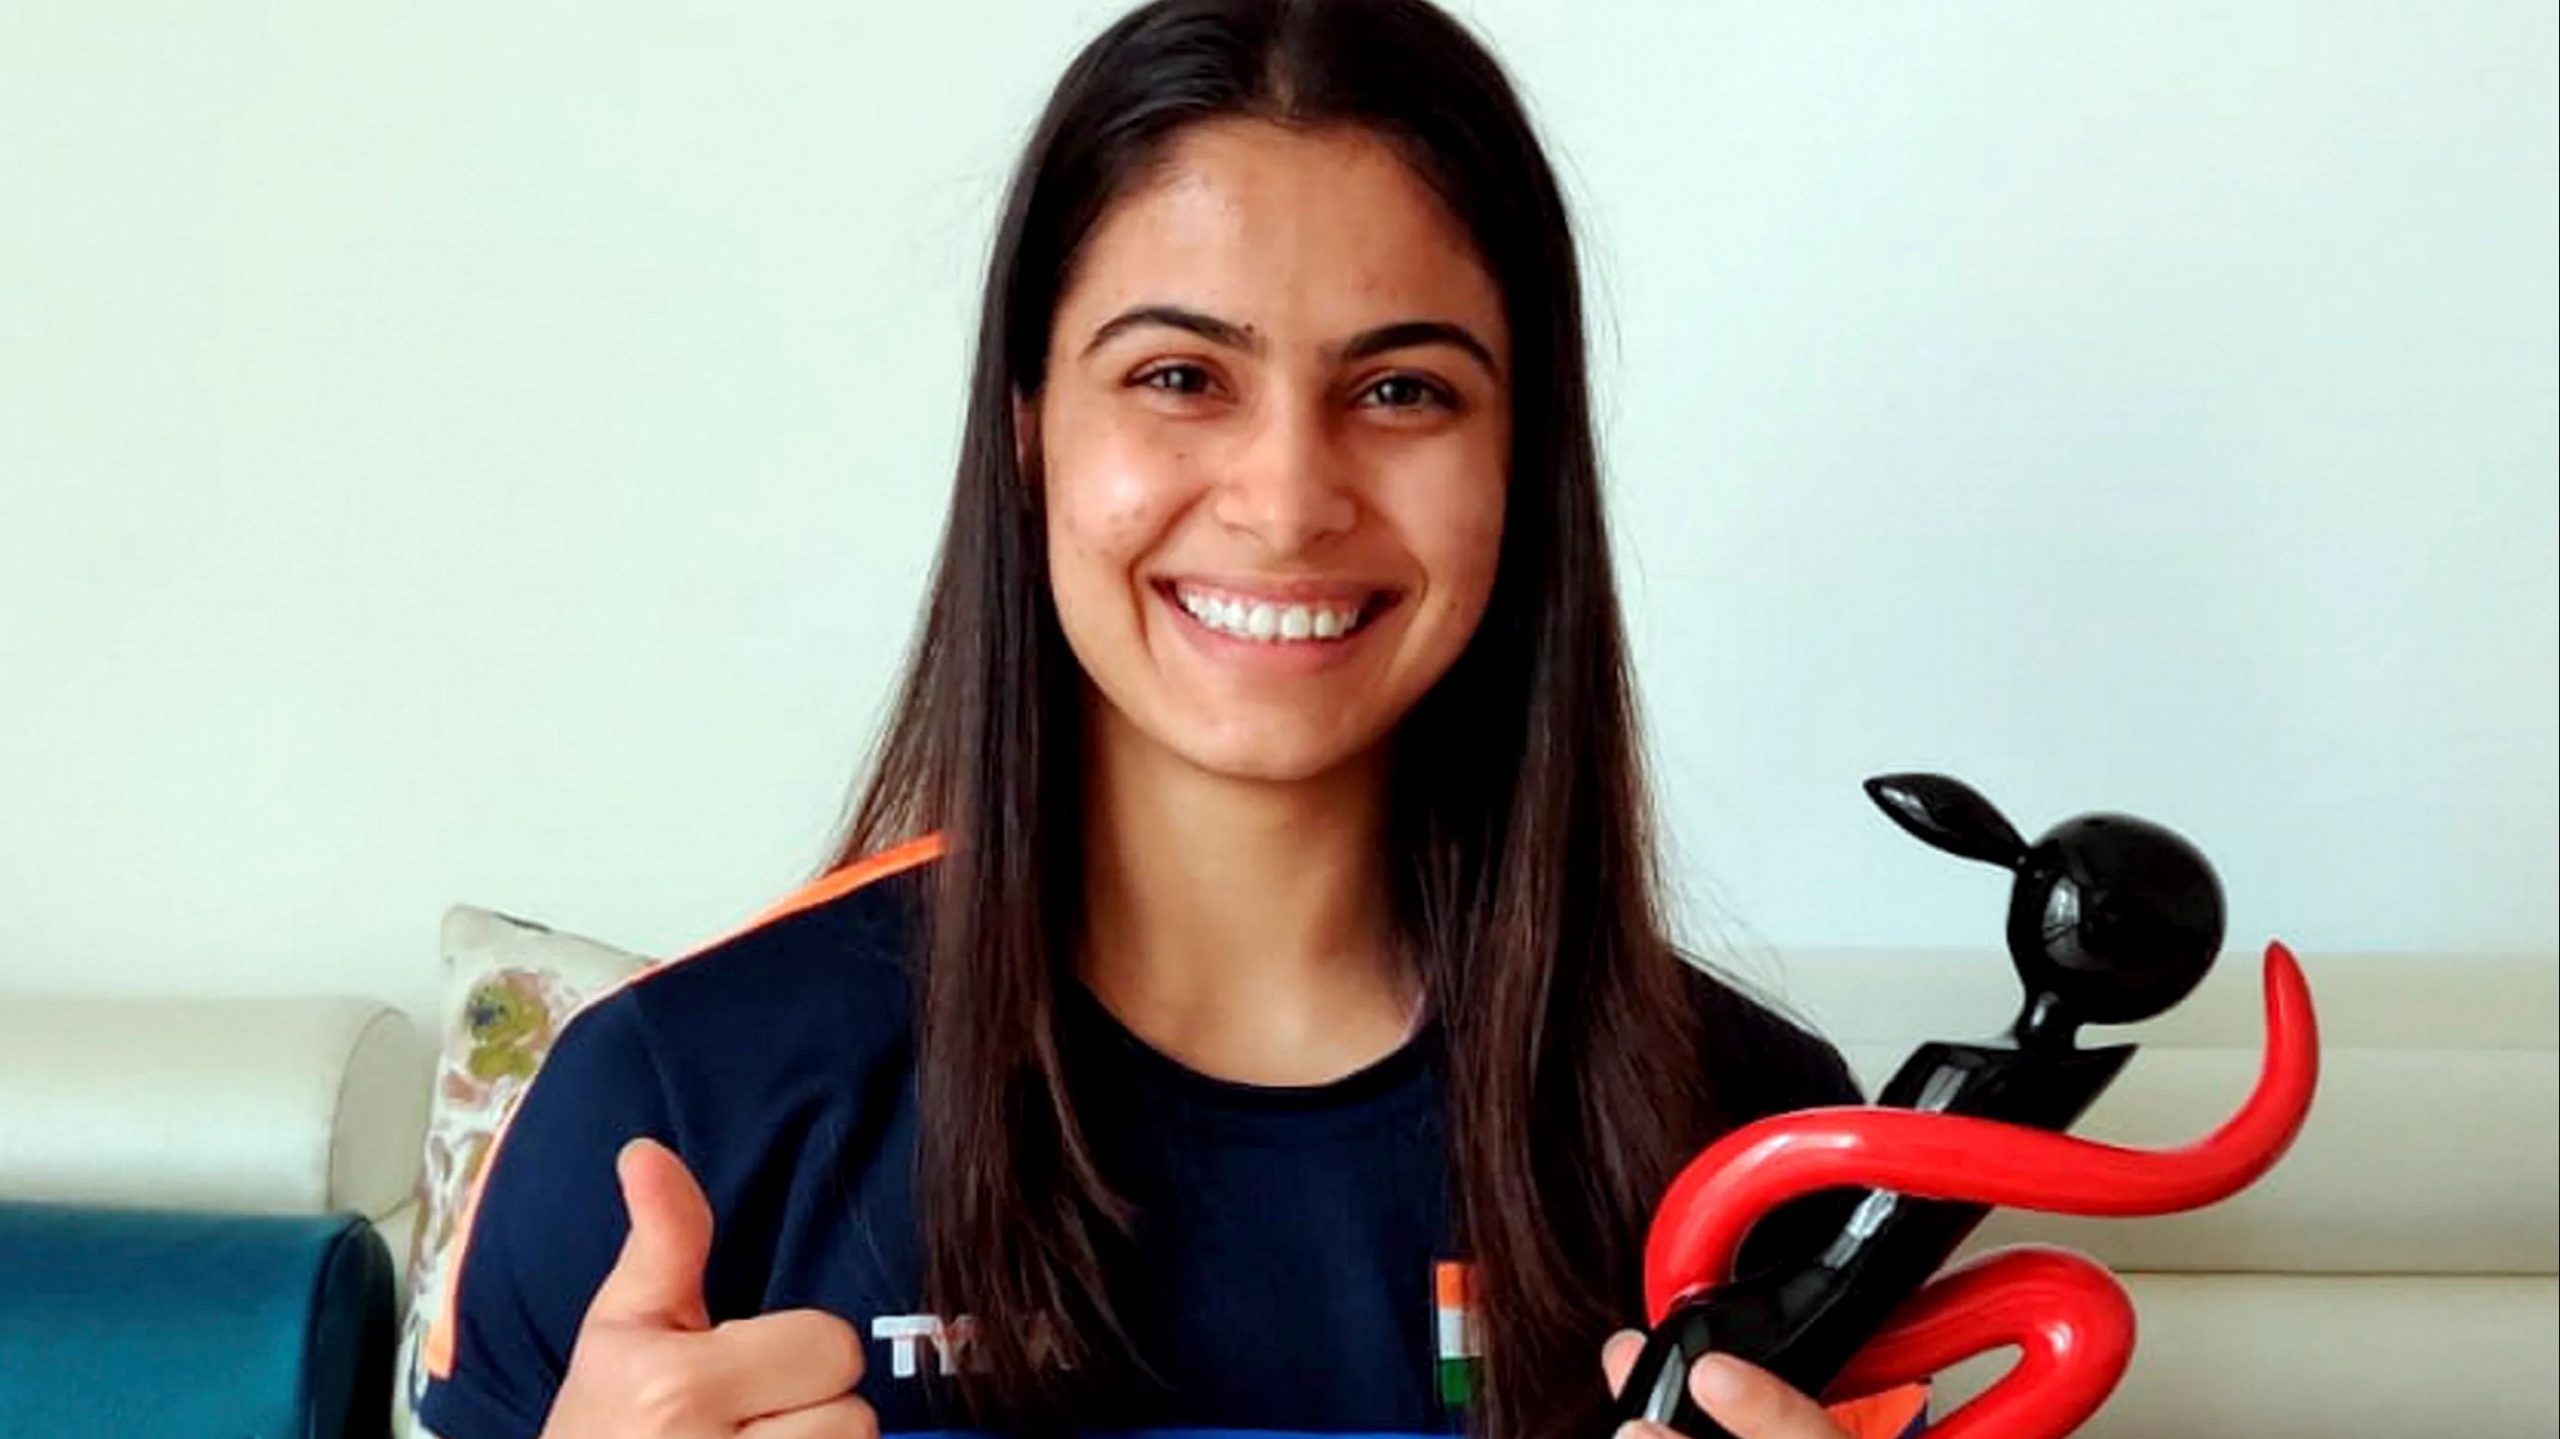 Who is Manu Bhaker?